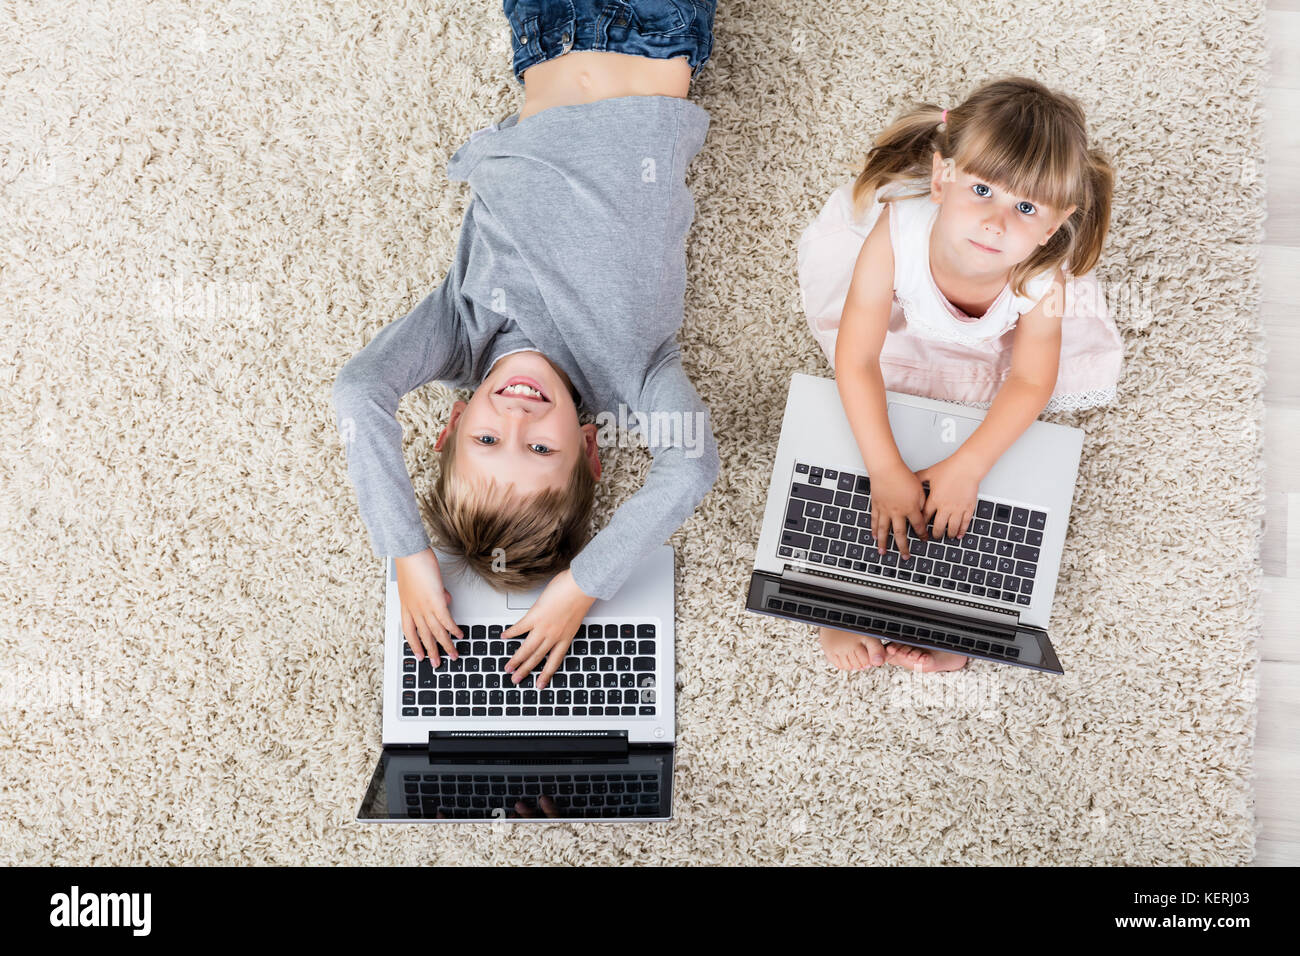 High Angle View Of Kids With Laptop Computer On Carpet At Home Stock Photo